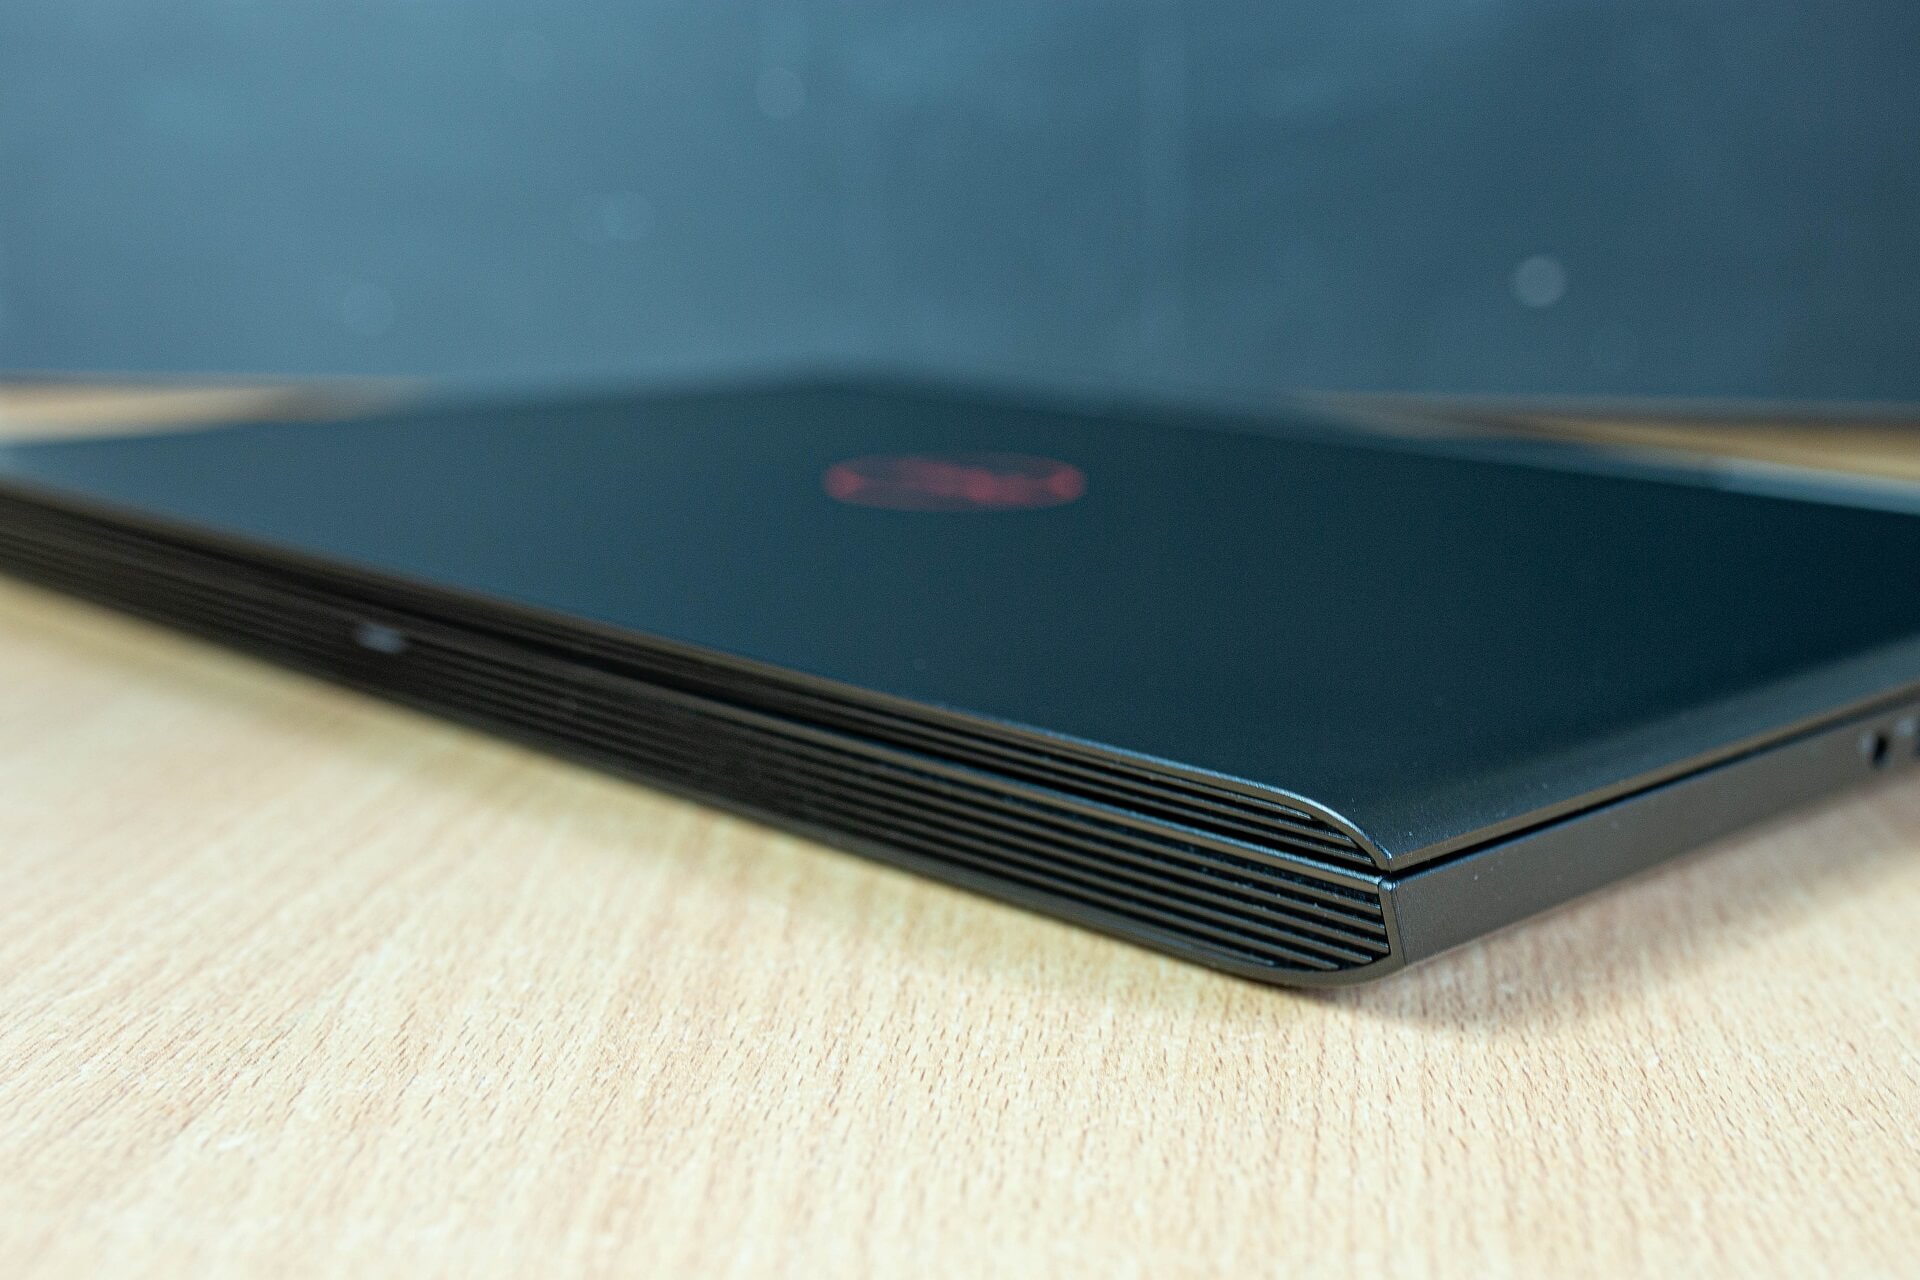 The new Dell G3 and G5 gaming laptops